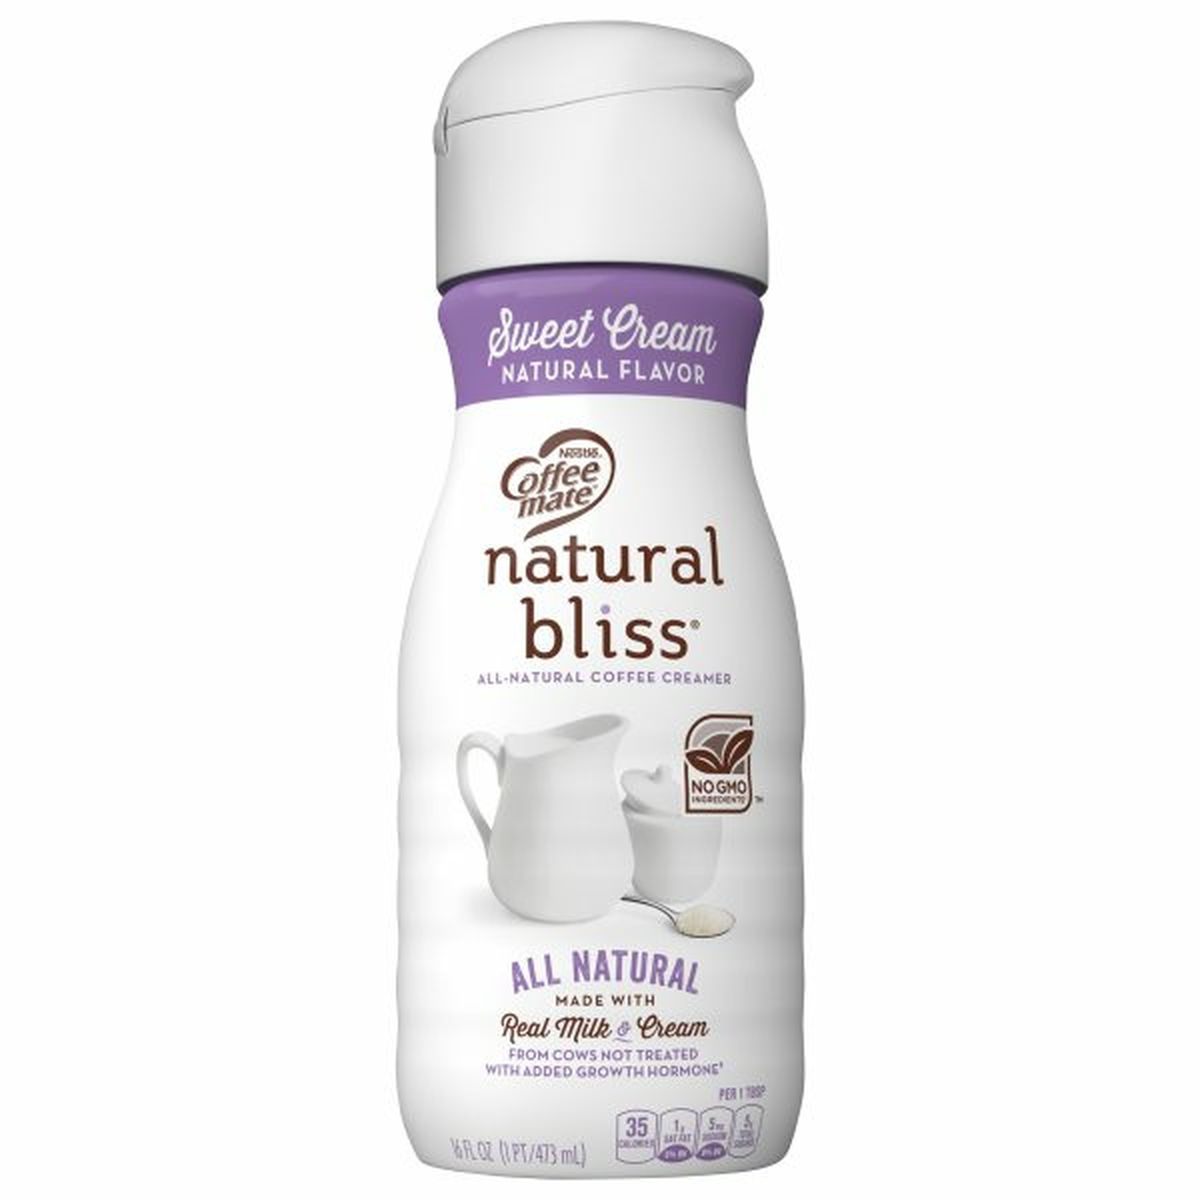 Calories in Natural Bliss Natural Bliss Coffee Creamer, All Natural, Sweet Cream